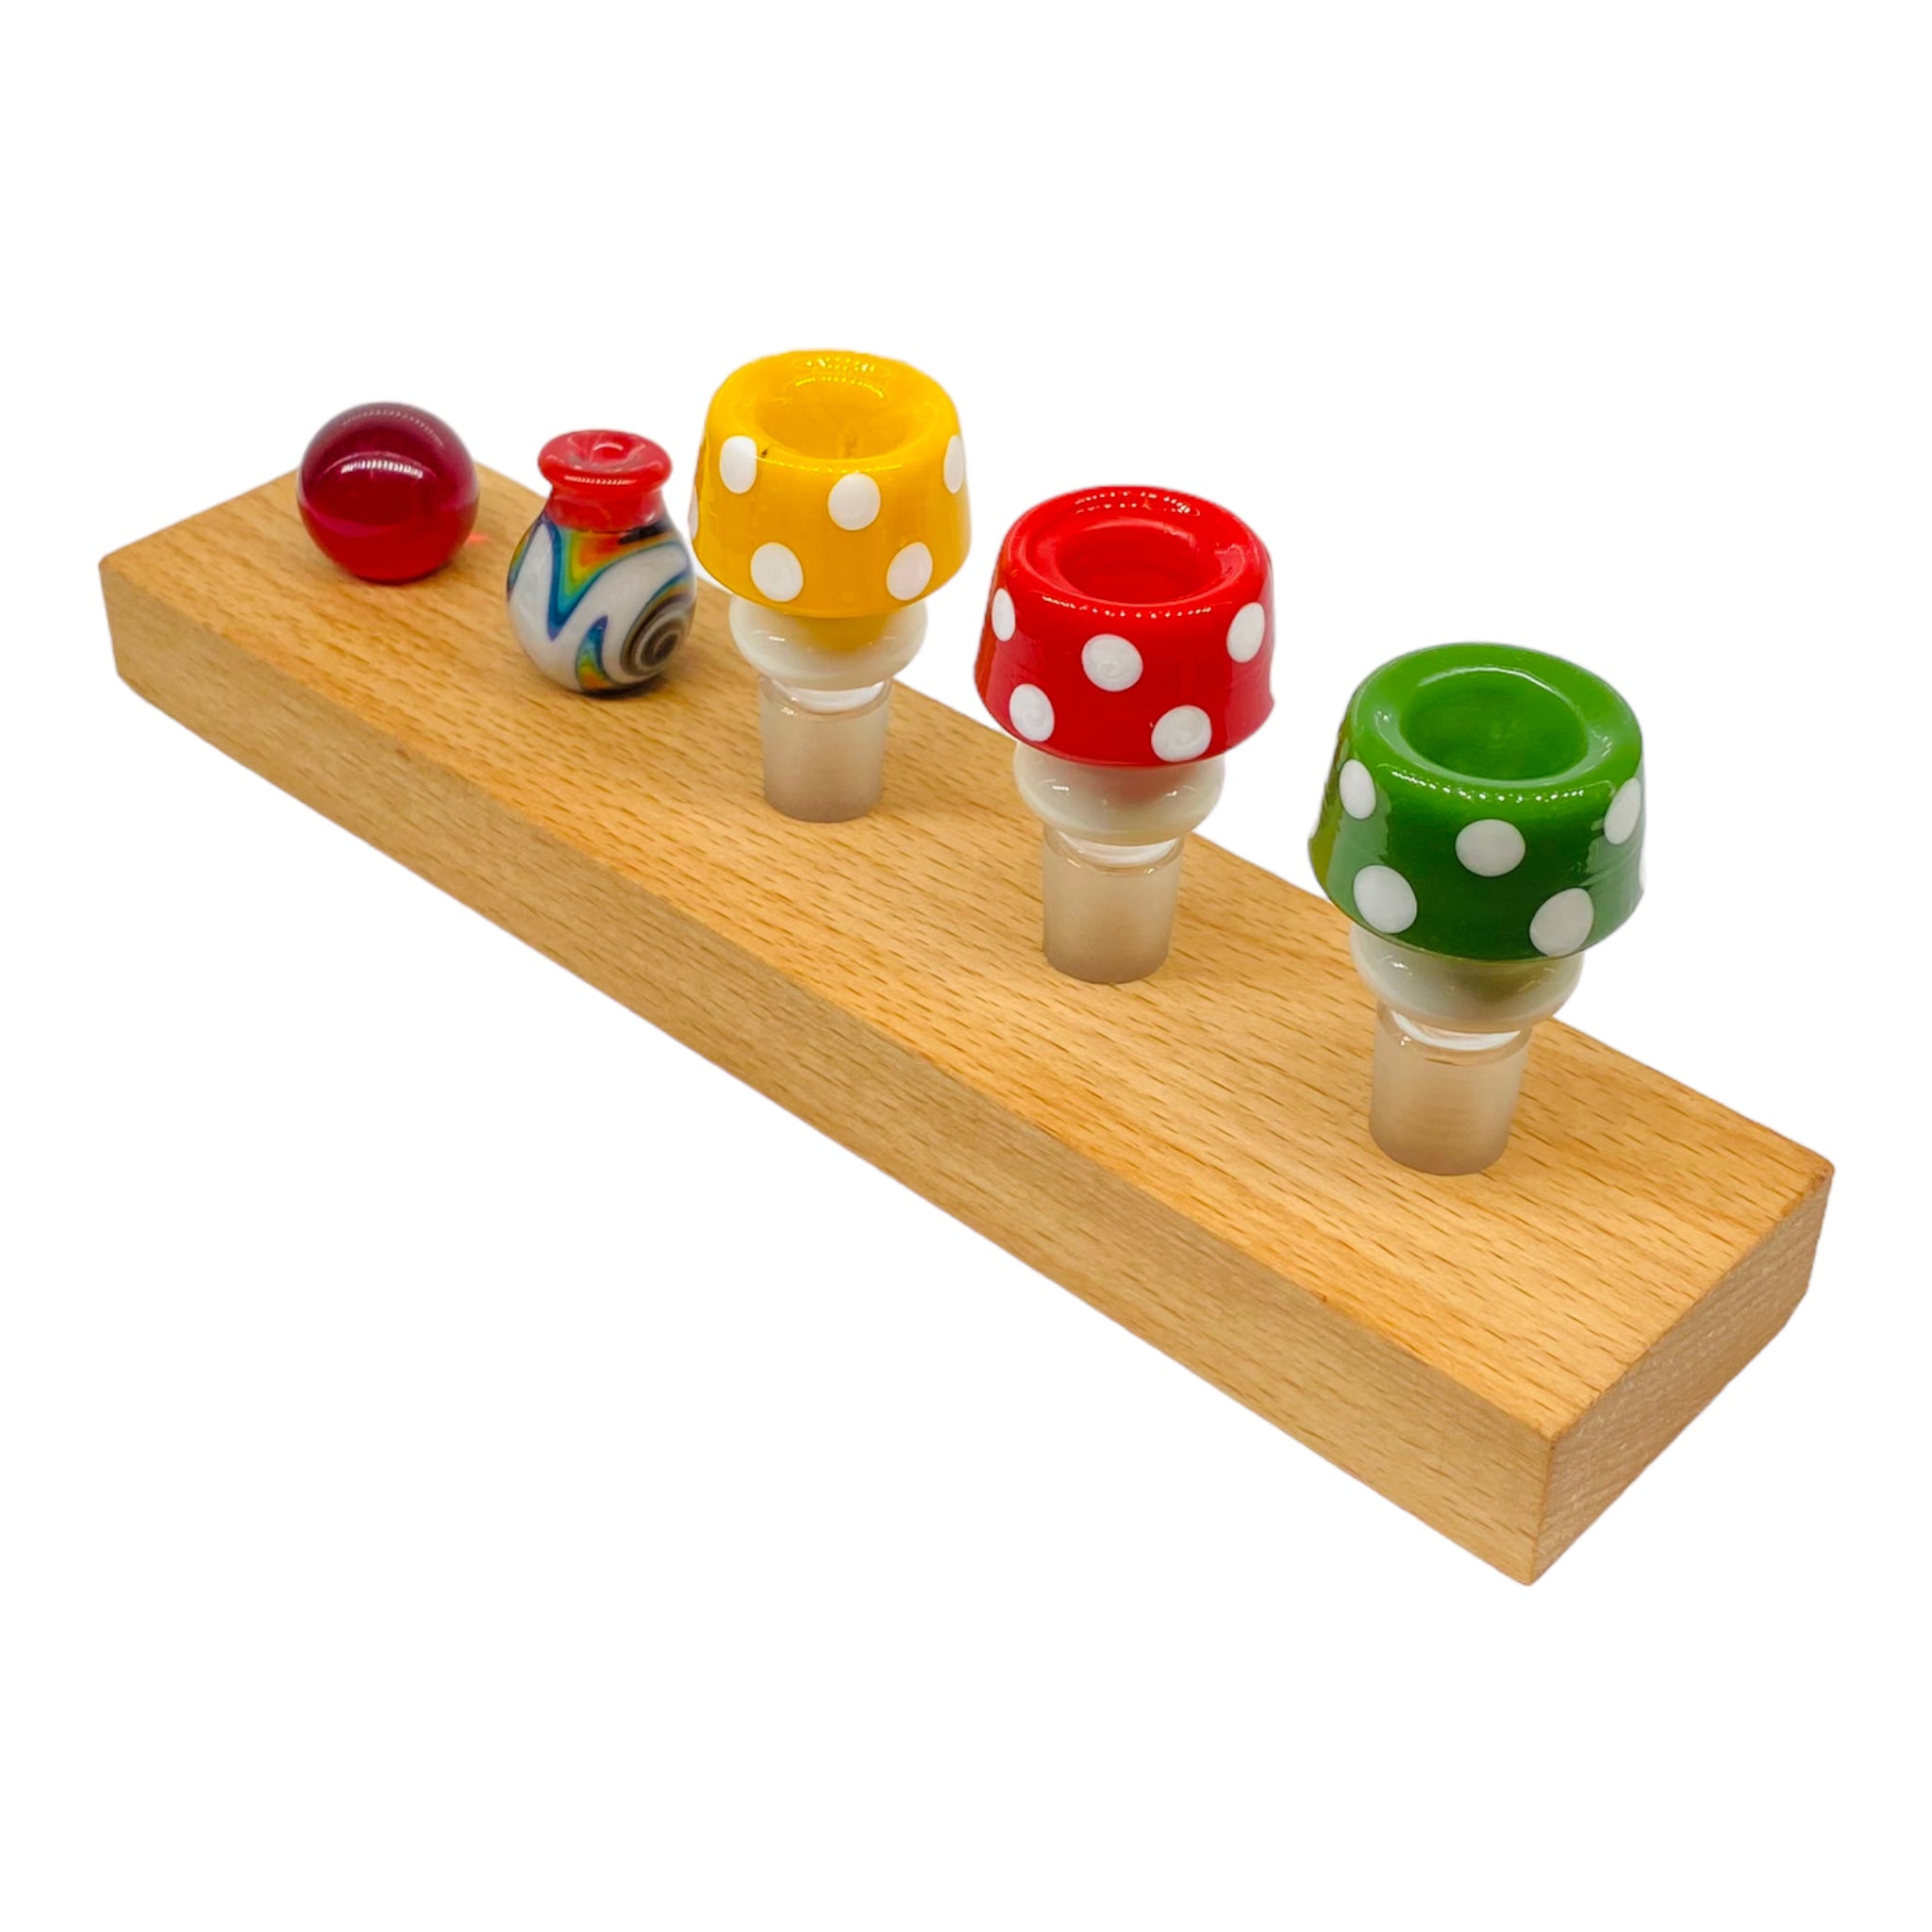 5 Hole Wood Display Stand Holder For 14mm Bong Bowl Pieces Or Quartz Bangers - Cedar Perfect for displaying 14mm Bong Bowl Pieces, Quartz Bangers, Carb Caps, And Marbles.